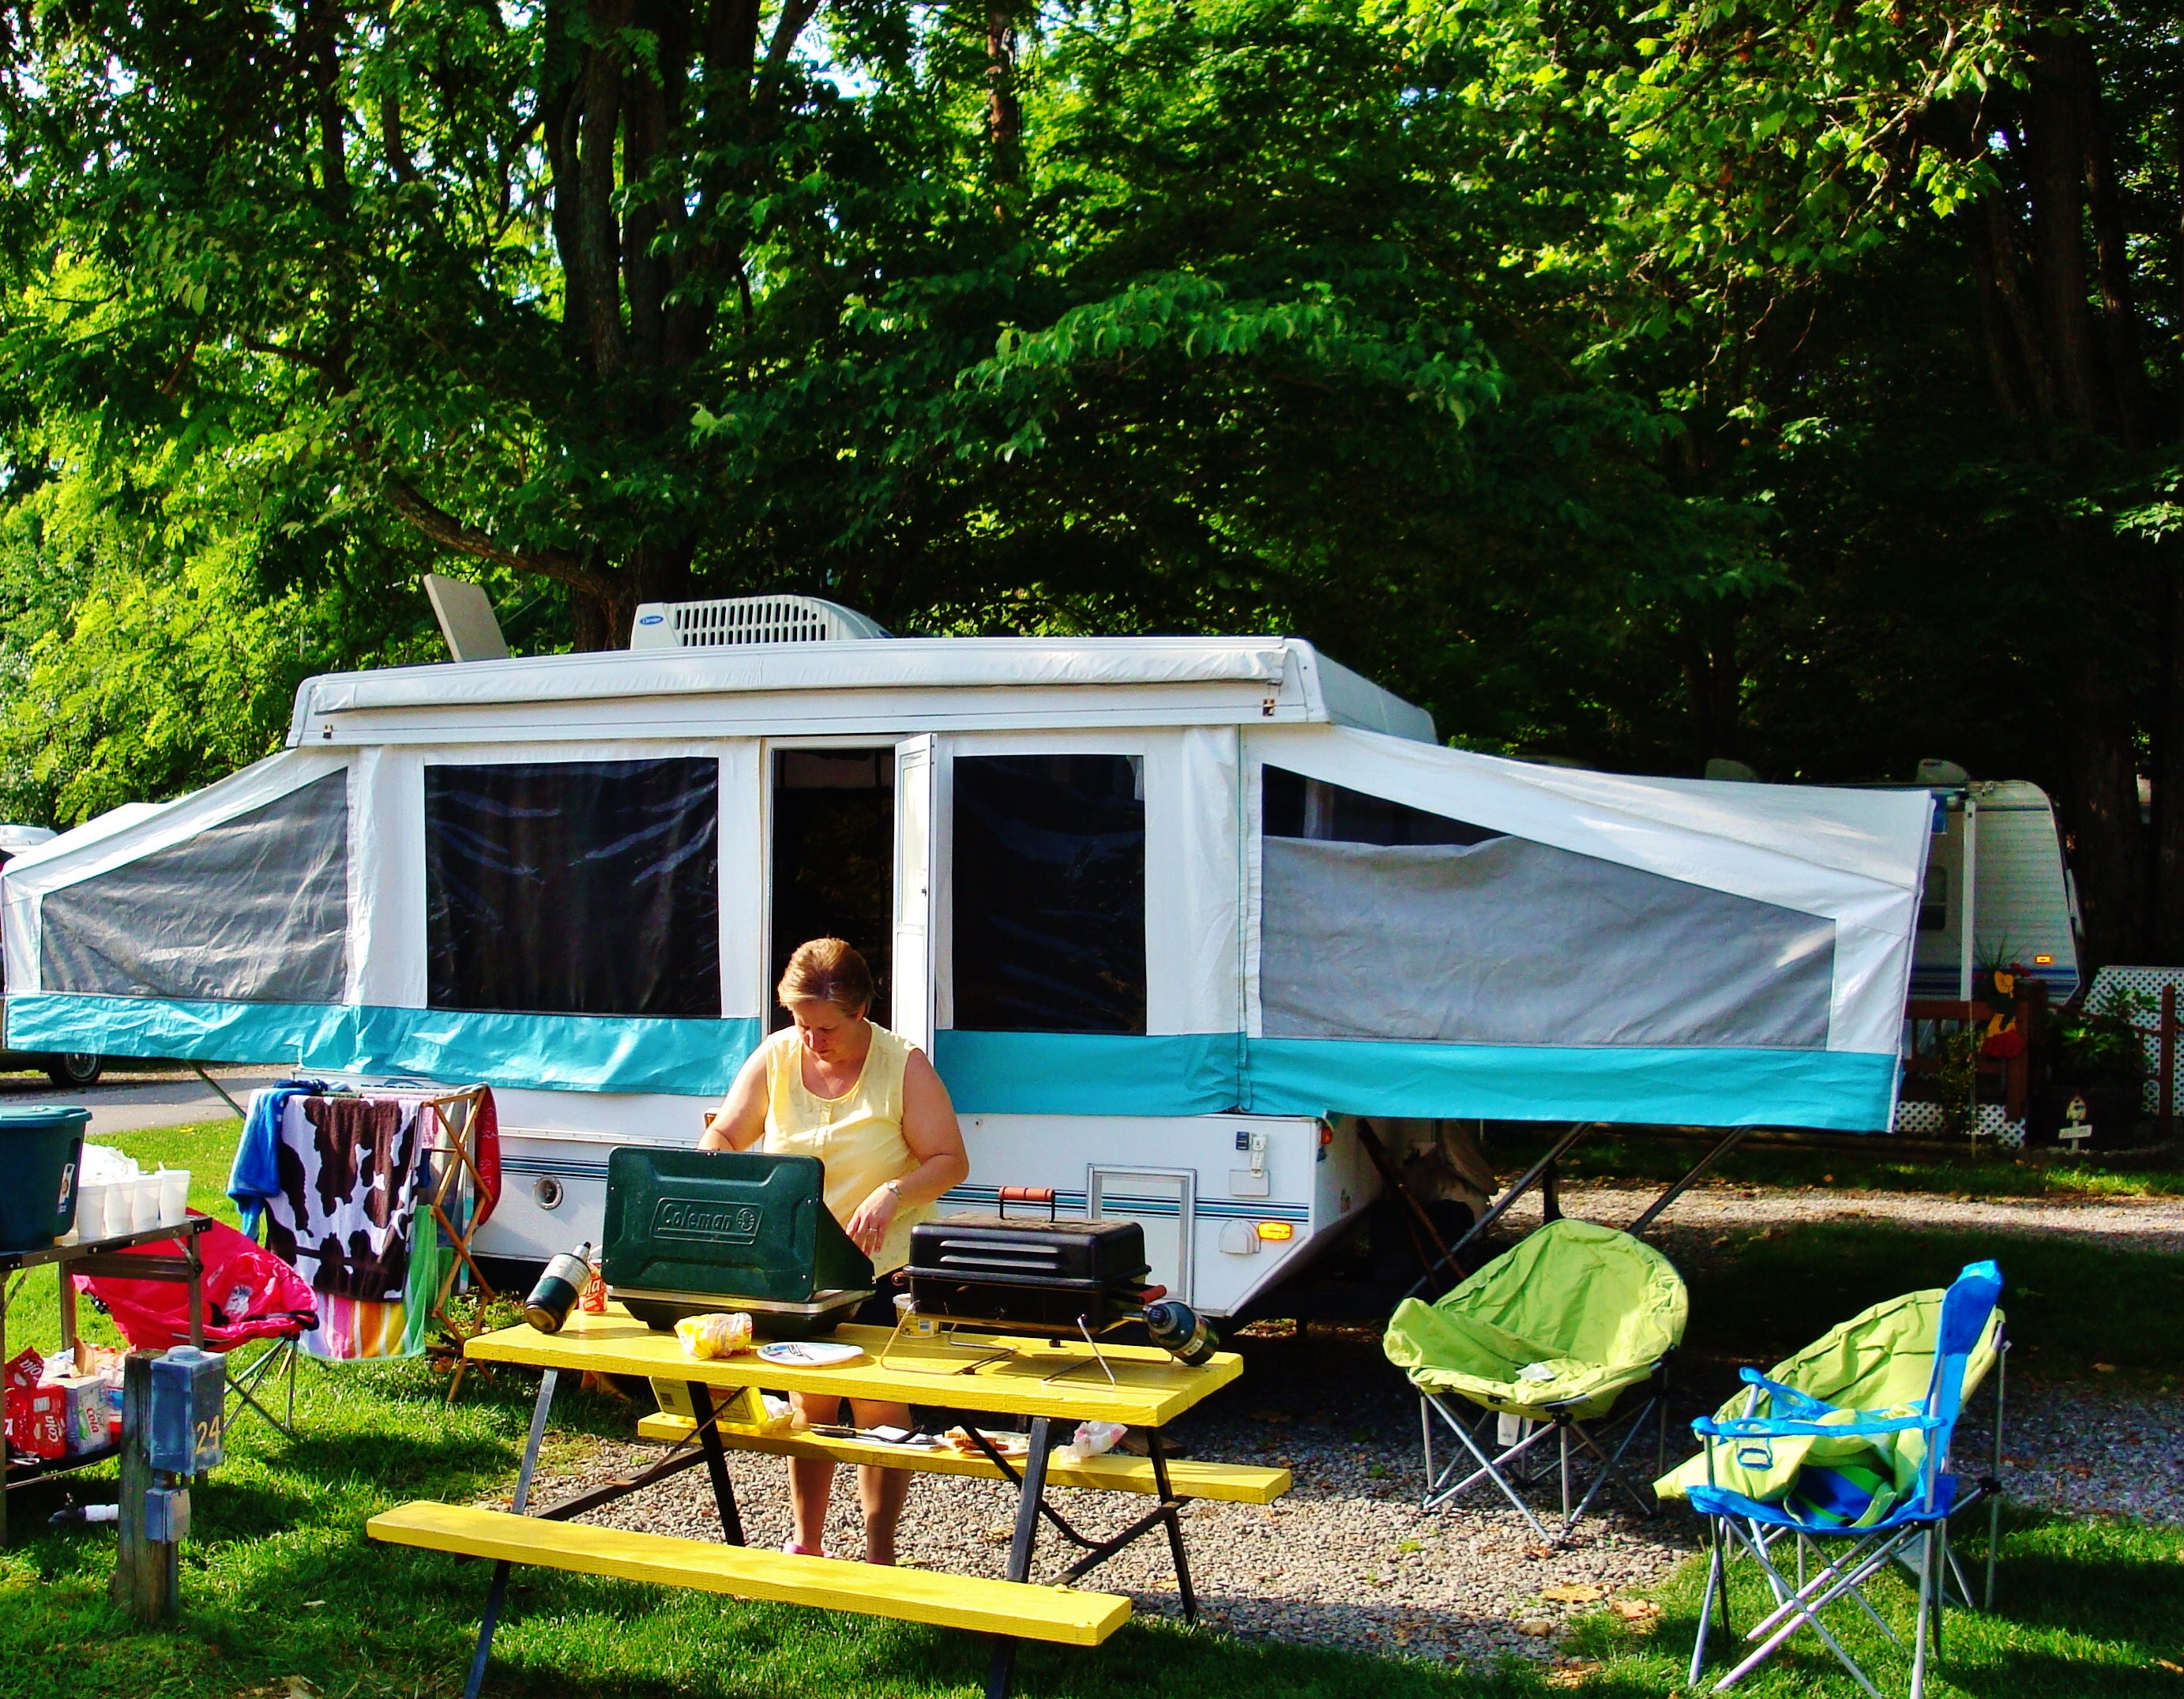 Unlike some RV parks in the area, this campground allowed popup camping.